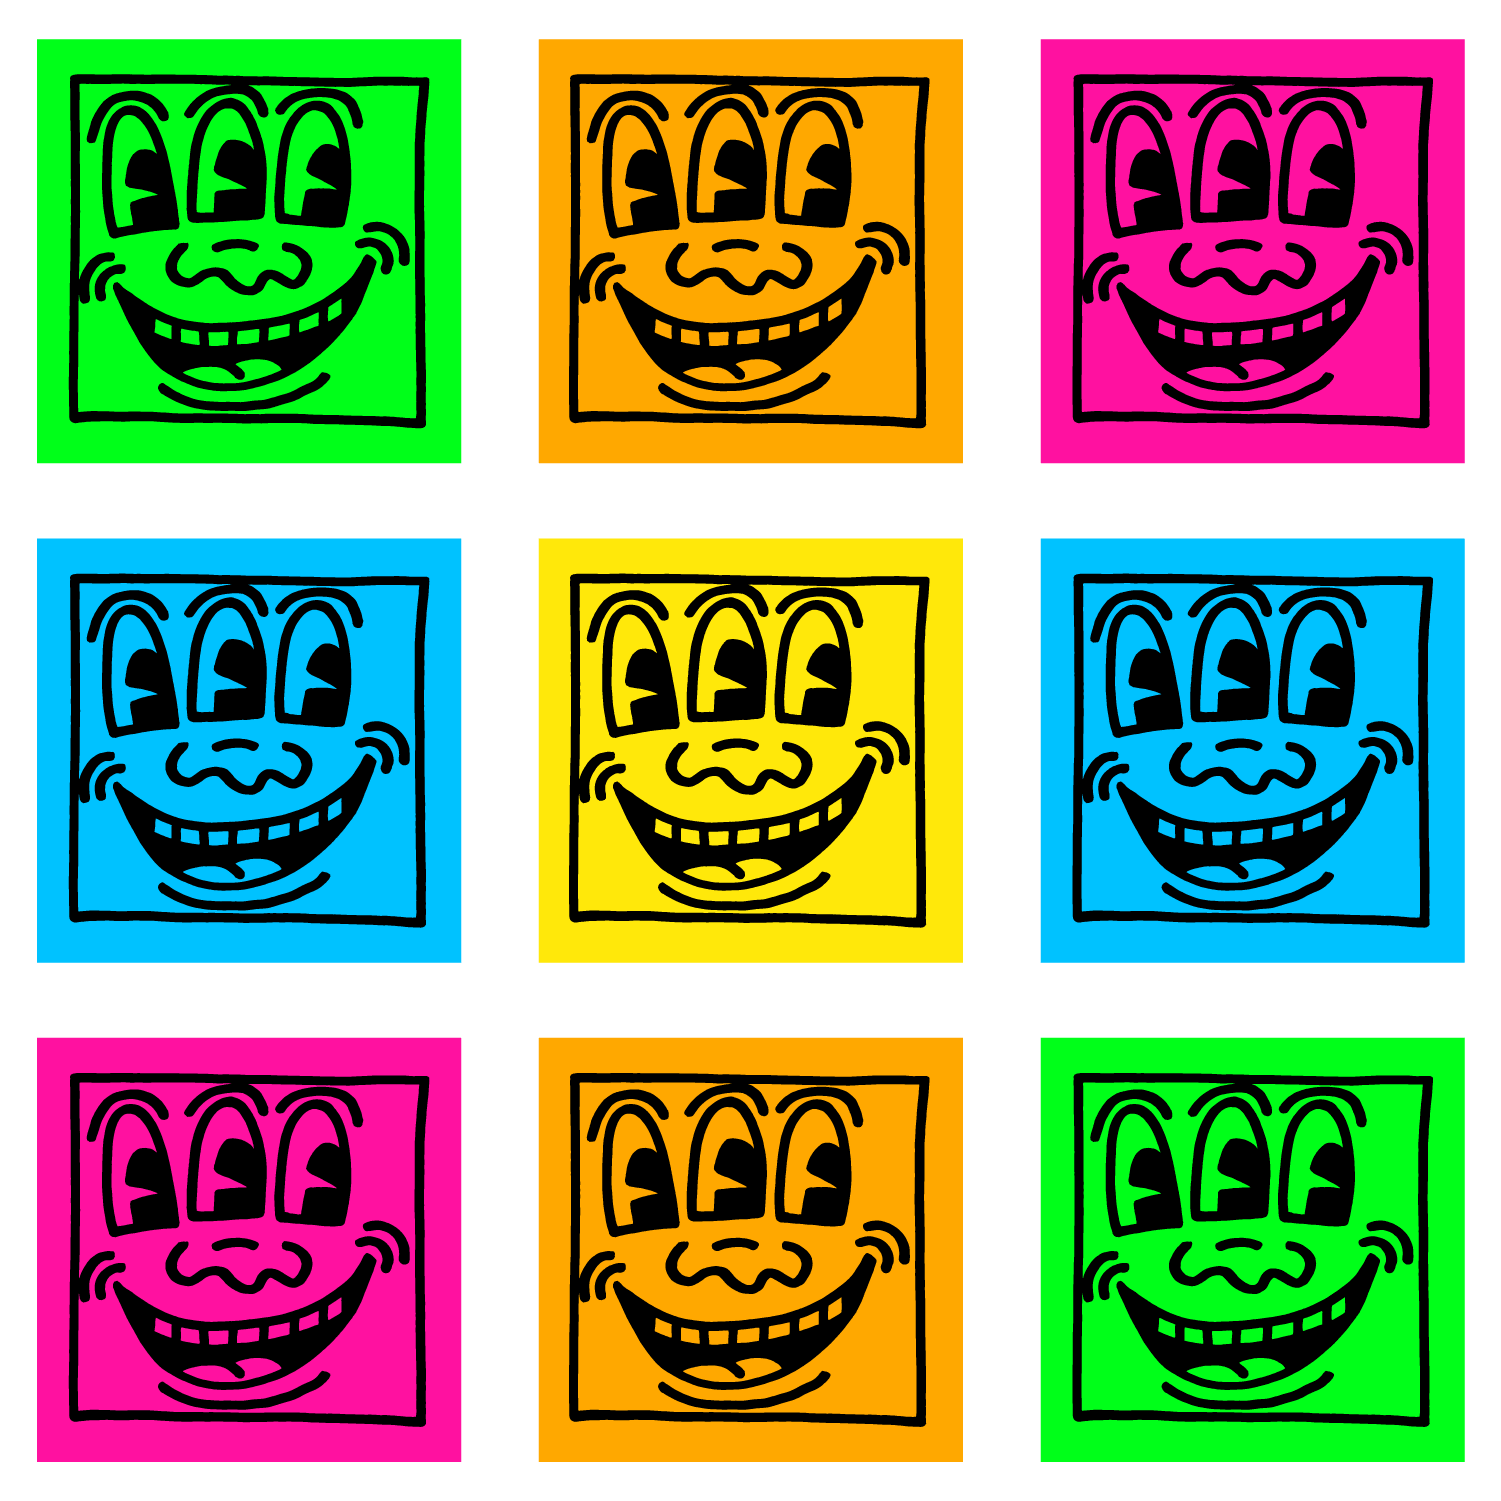 https://cdn.accentuate.io/7030201385004/1686343172259/KH_Sheet_Three_Eyed_Faces_Stickers_Hover.png?v=1686343172260